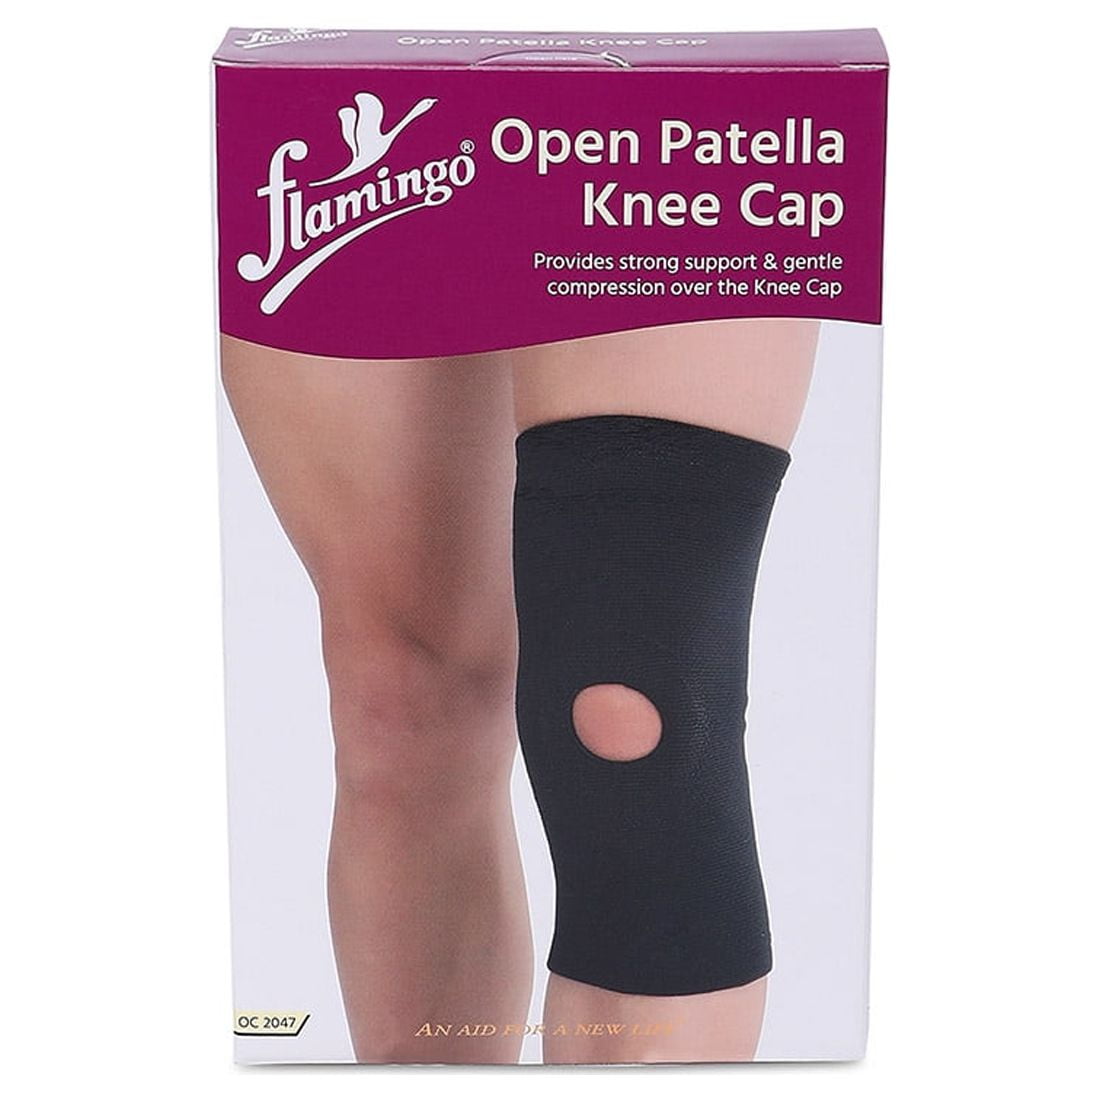 Tynor Knee Cap Neo N.O Large, 1 Count Price, Uses, Side Effects,  Composition - Apollo Pharmacy